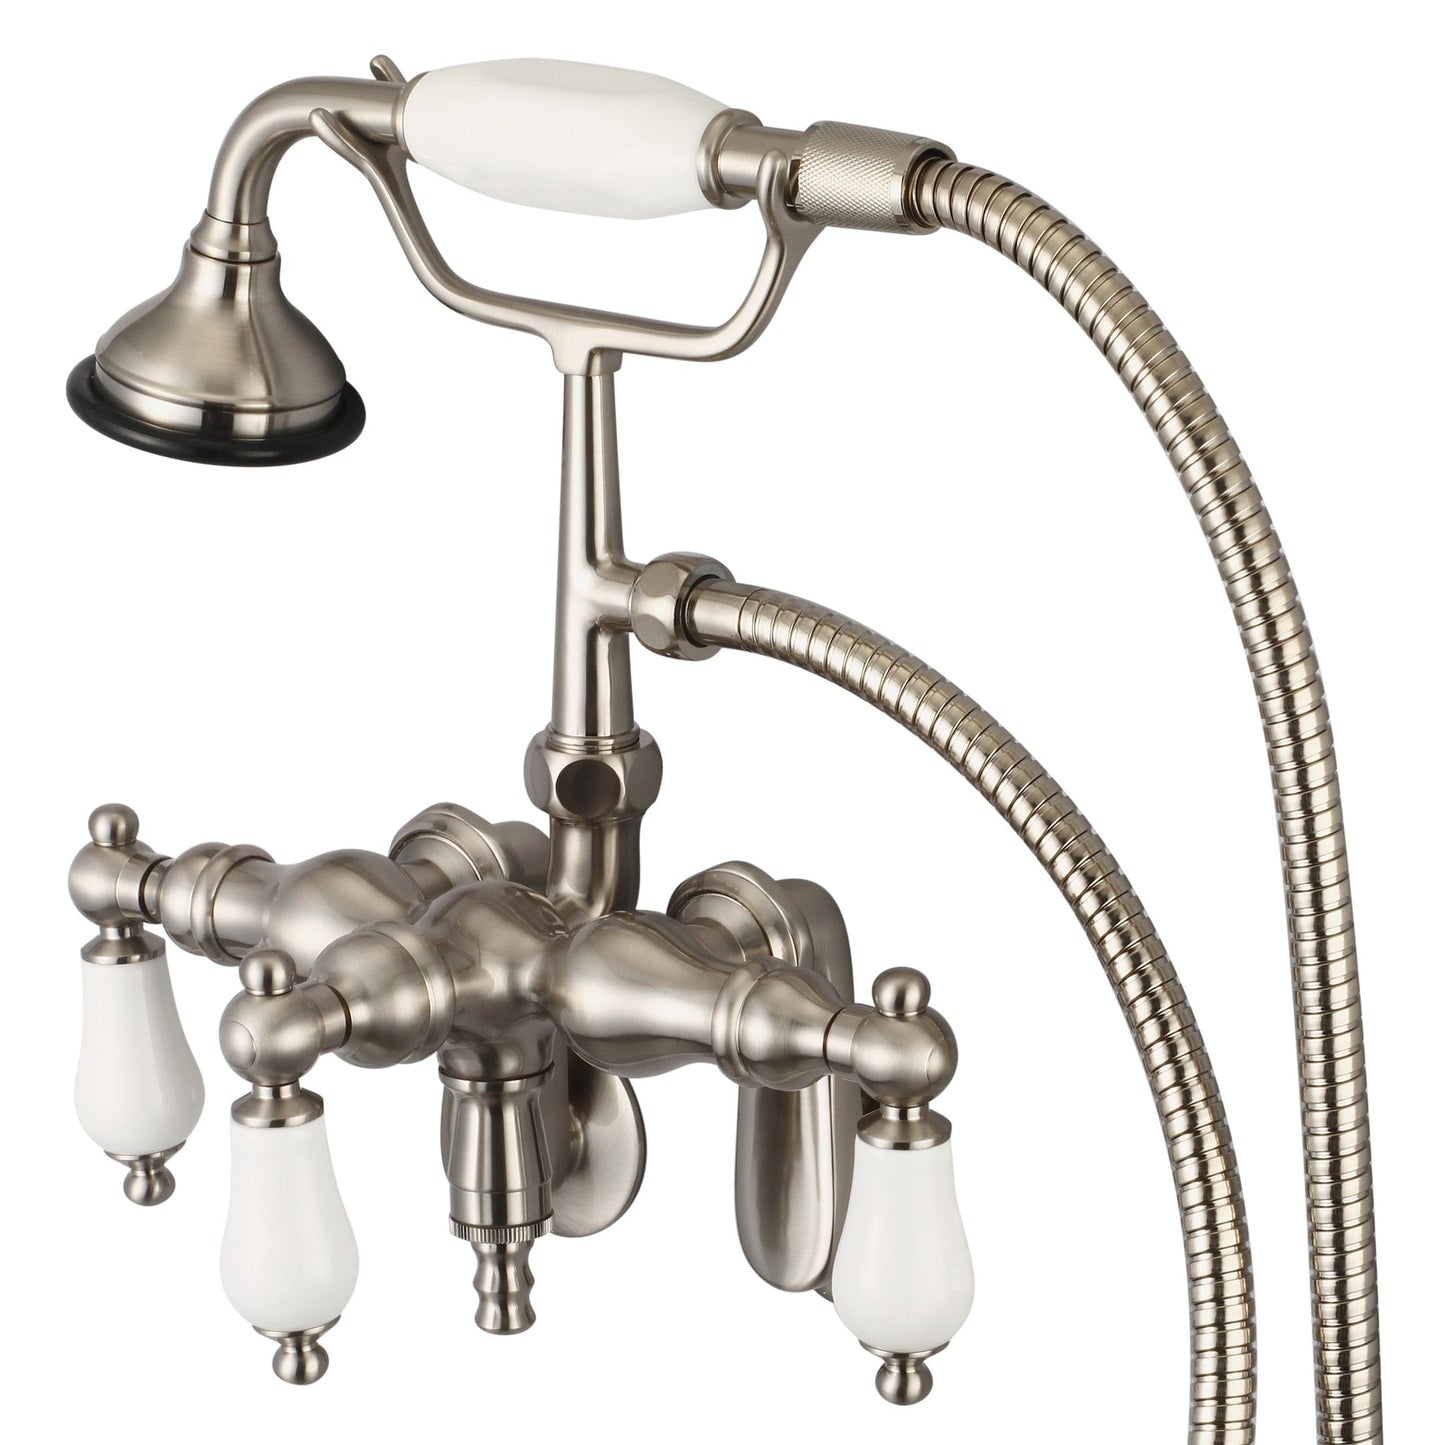 Water Creation Vintage Classic Center Wall Mount Tub F6-0018 9.25" Grey Solid Brass Faucet With Down Spout, Swivel Wall Connector And Handheld Shower And Porcelain Lever Handles Without Labels